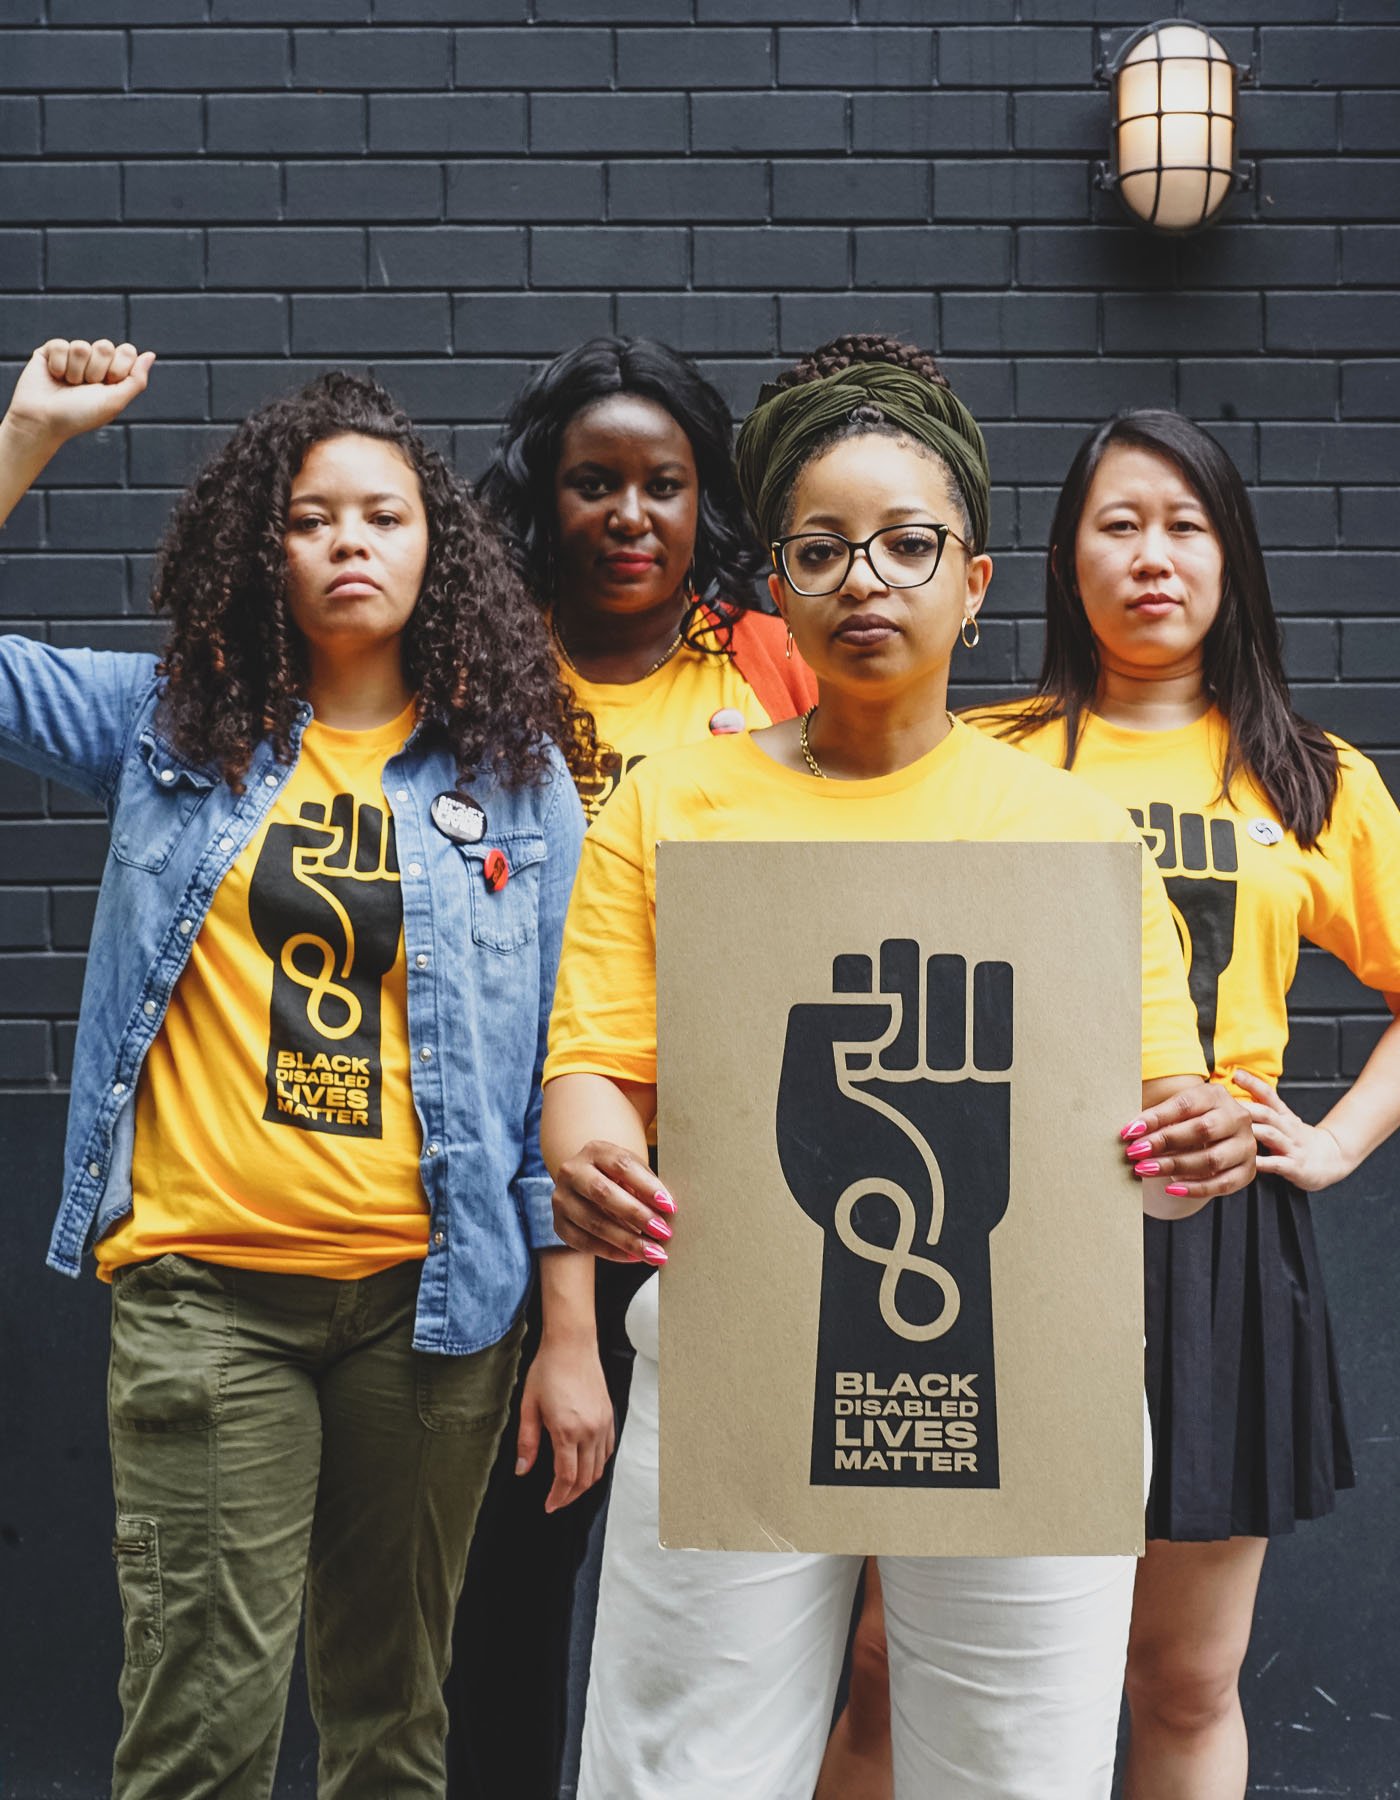 Women wearing shirts with the Black Disabled Lives Matter logo pose together.